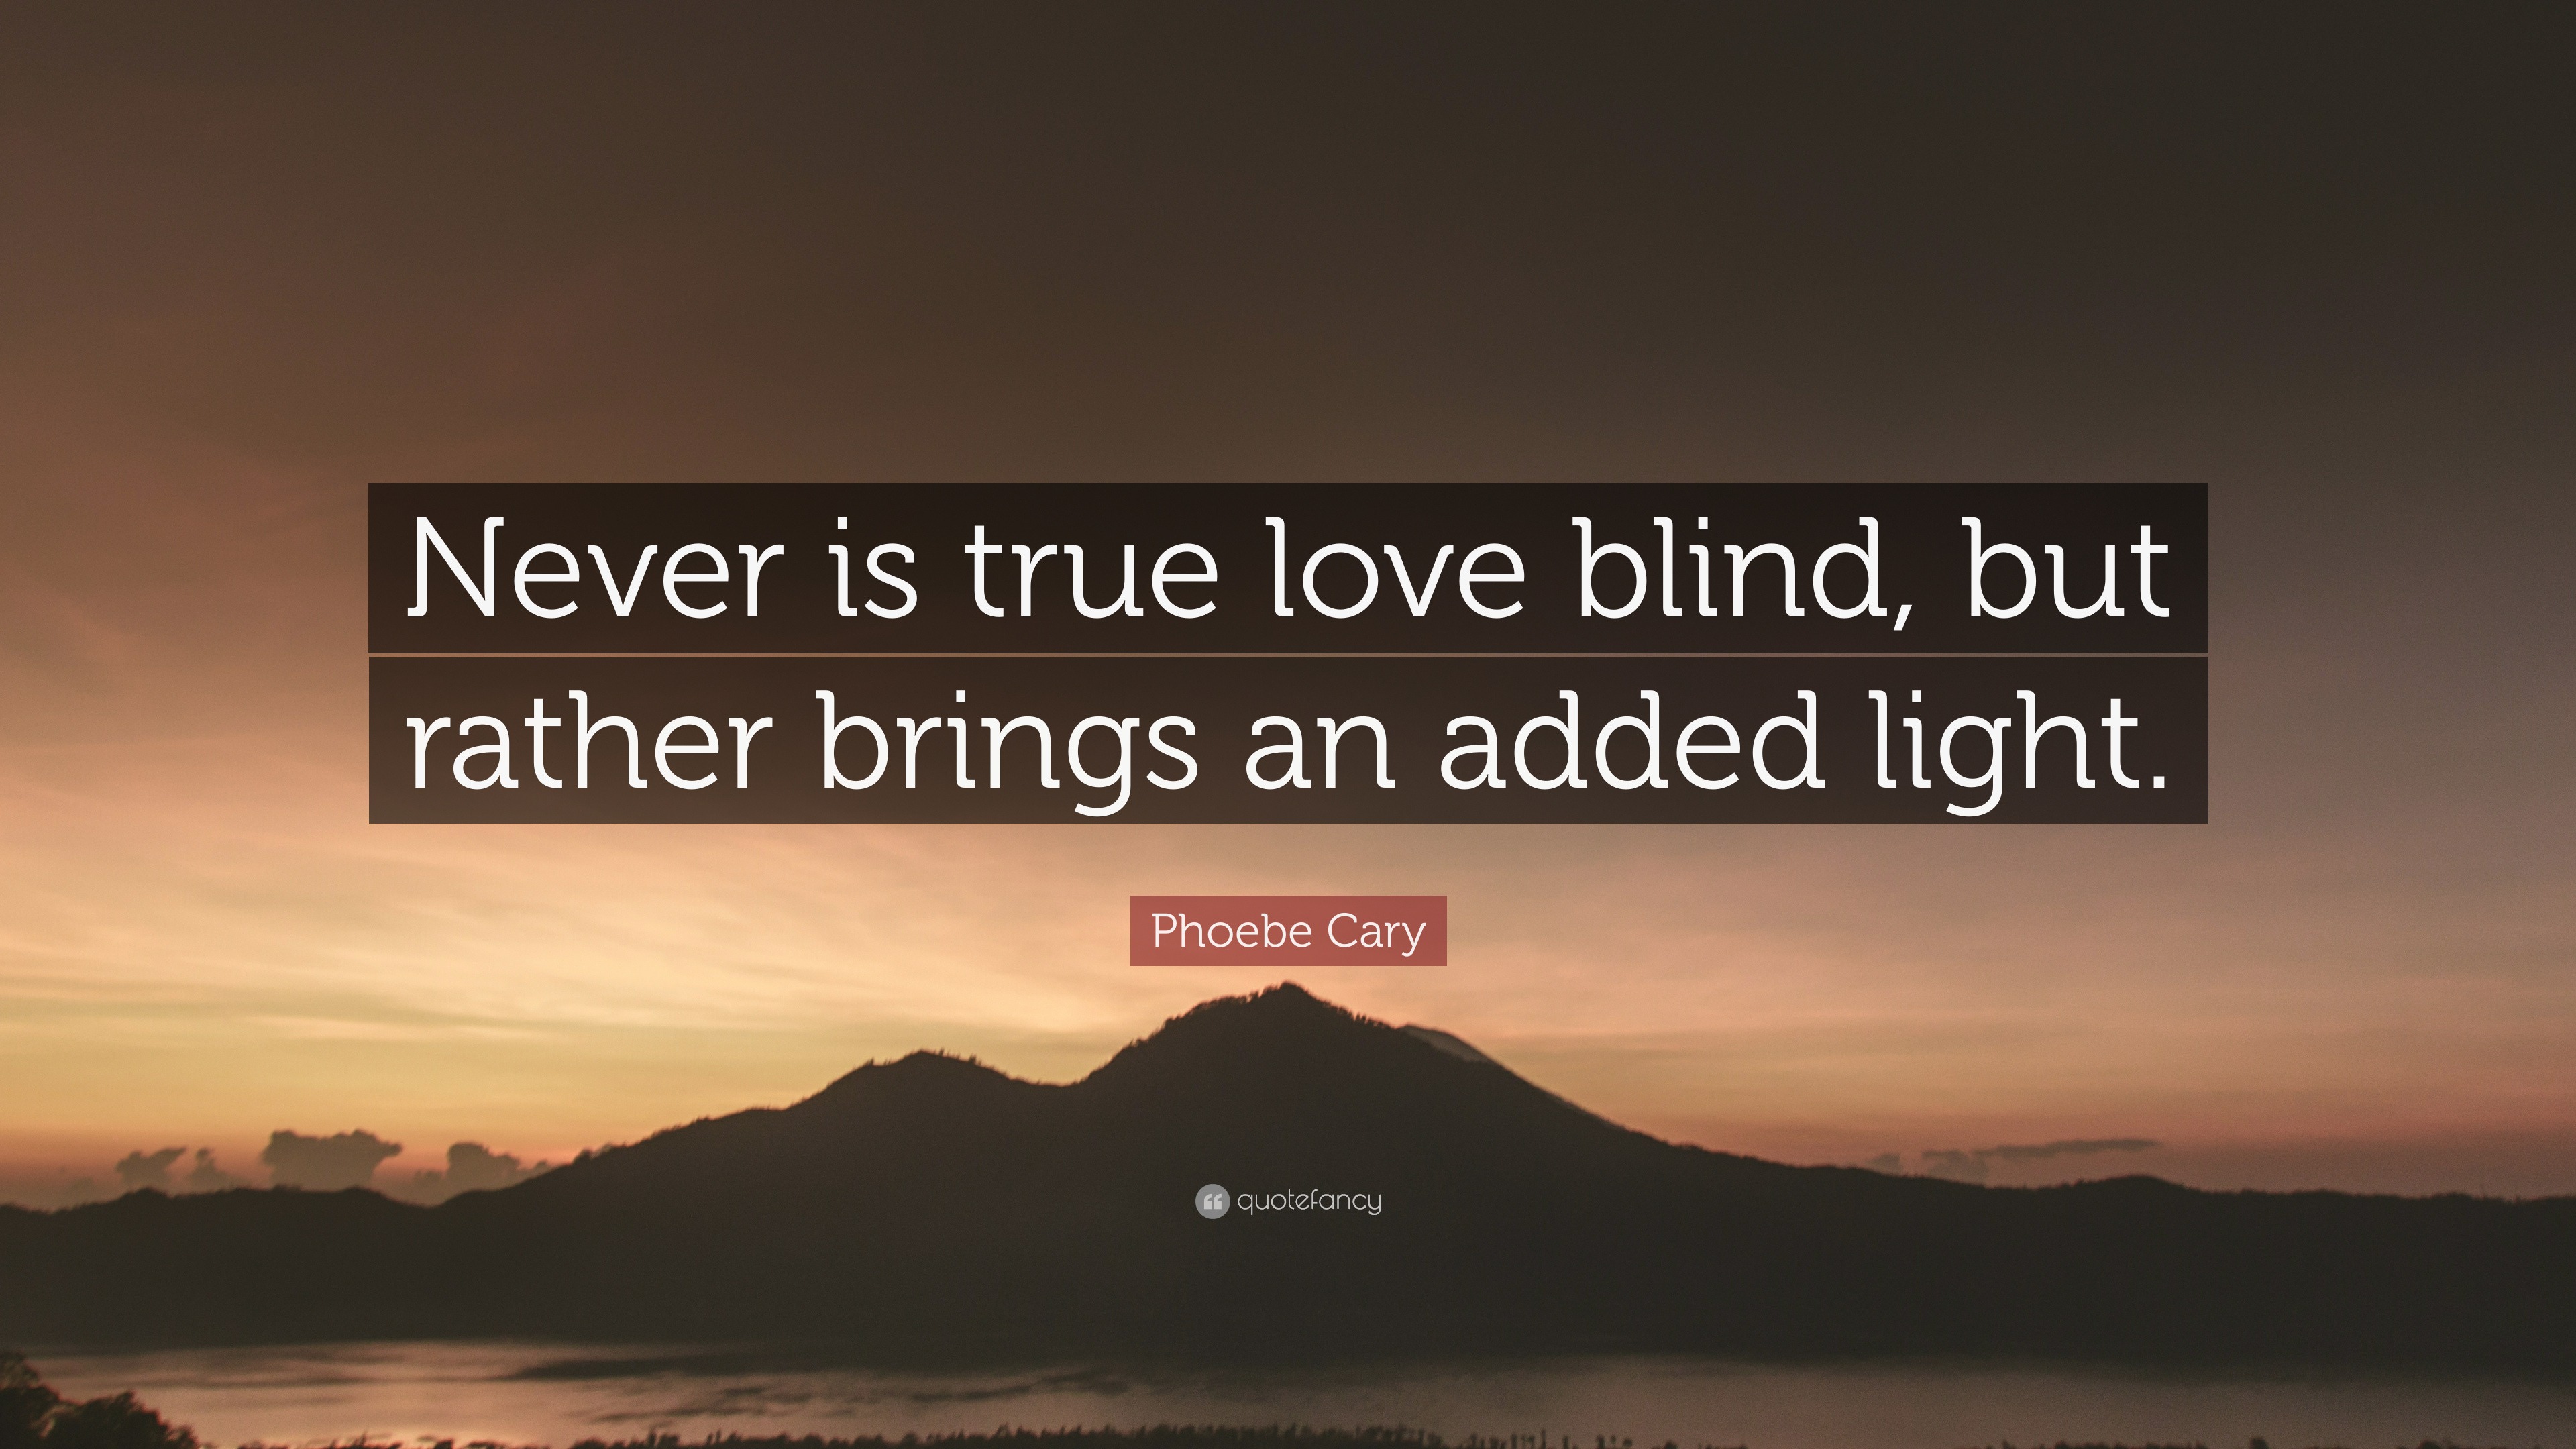 Phoebe Cary Quote “Never is true love blind but rather brings an added